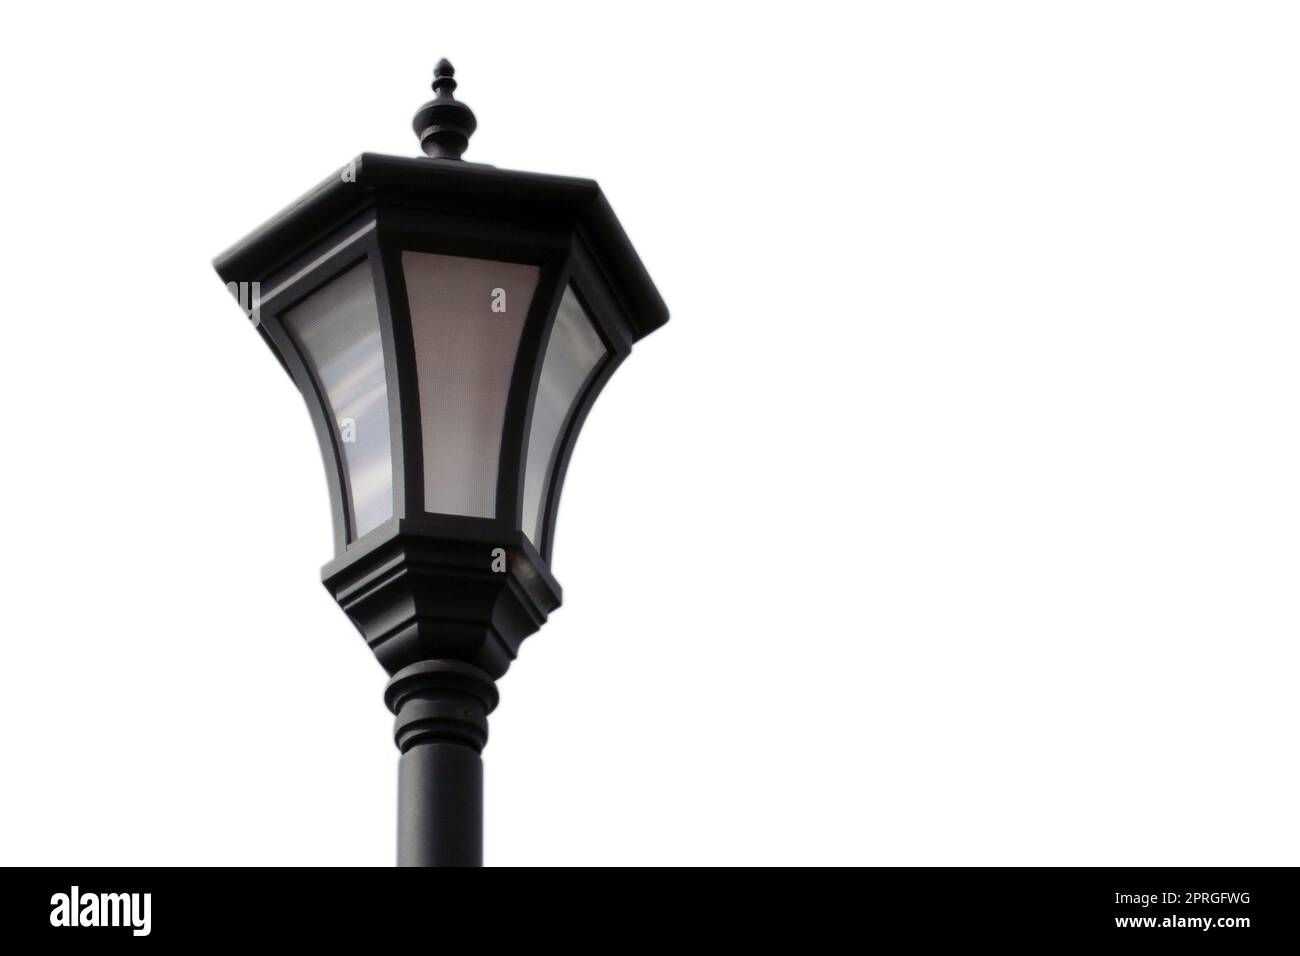 Old street lamp close up. Isolated object on a white background Stock Photo